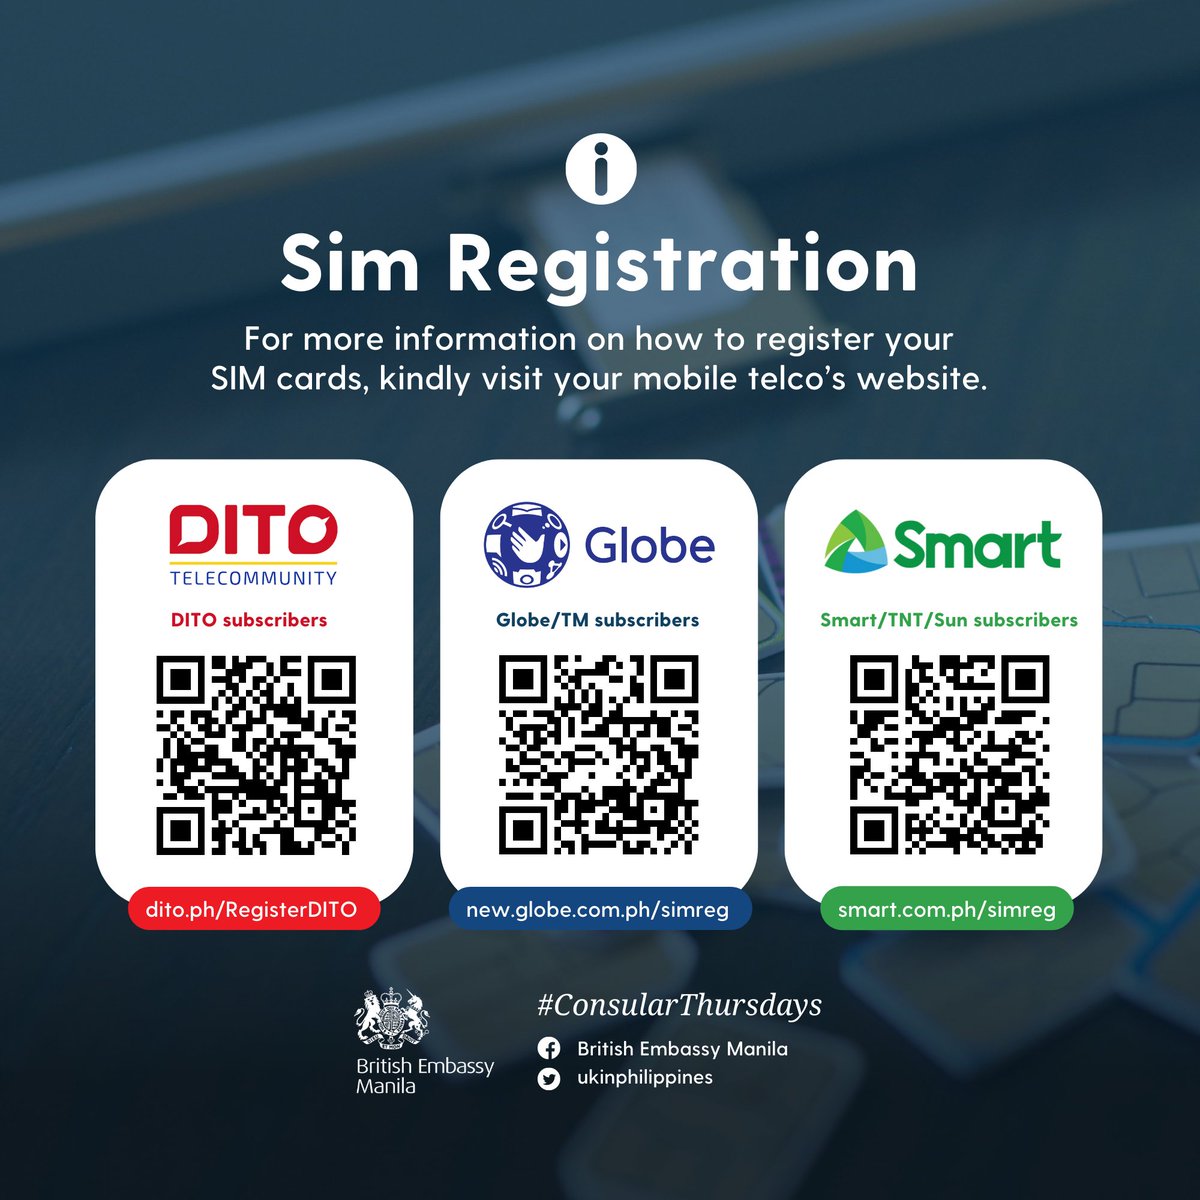 #DidUKnow that the deadline for registering your SIM is on 26 April?

All existing mobile phone & broadband subscribers are given only until Wednesday next week to register their SIM cards. SIMs shall be deactivated if you fail to register before the deadline.

#ConsularThursdays